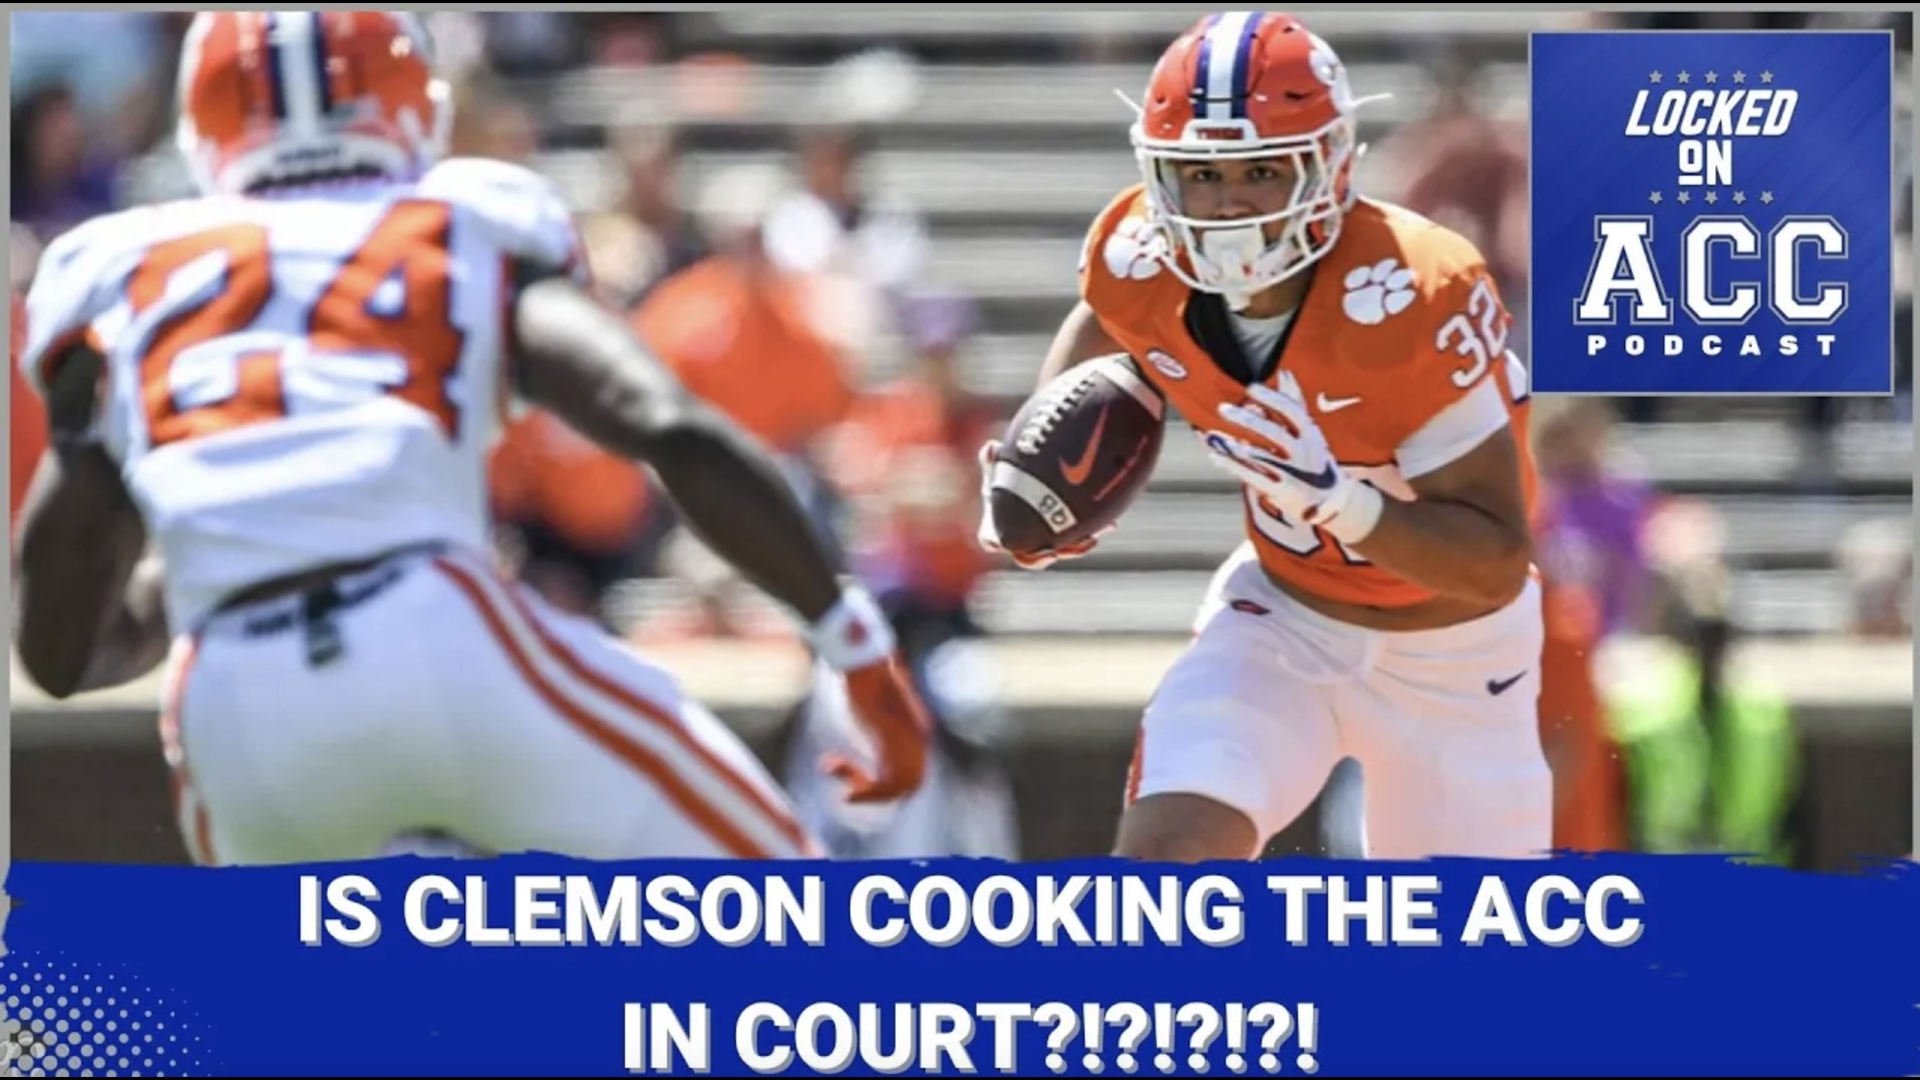 In today's episode, Kenton and Grayson discuss the antitrust cases and Clemson absolutely cooking with their latest argument.